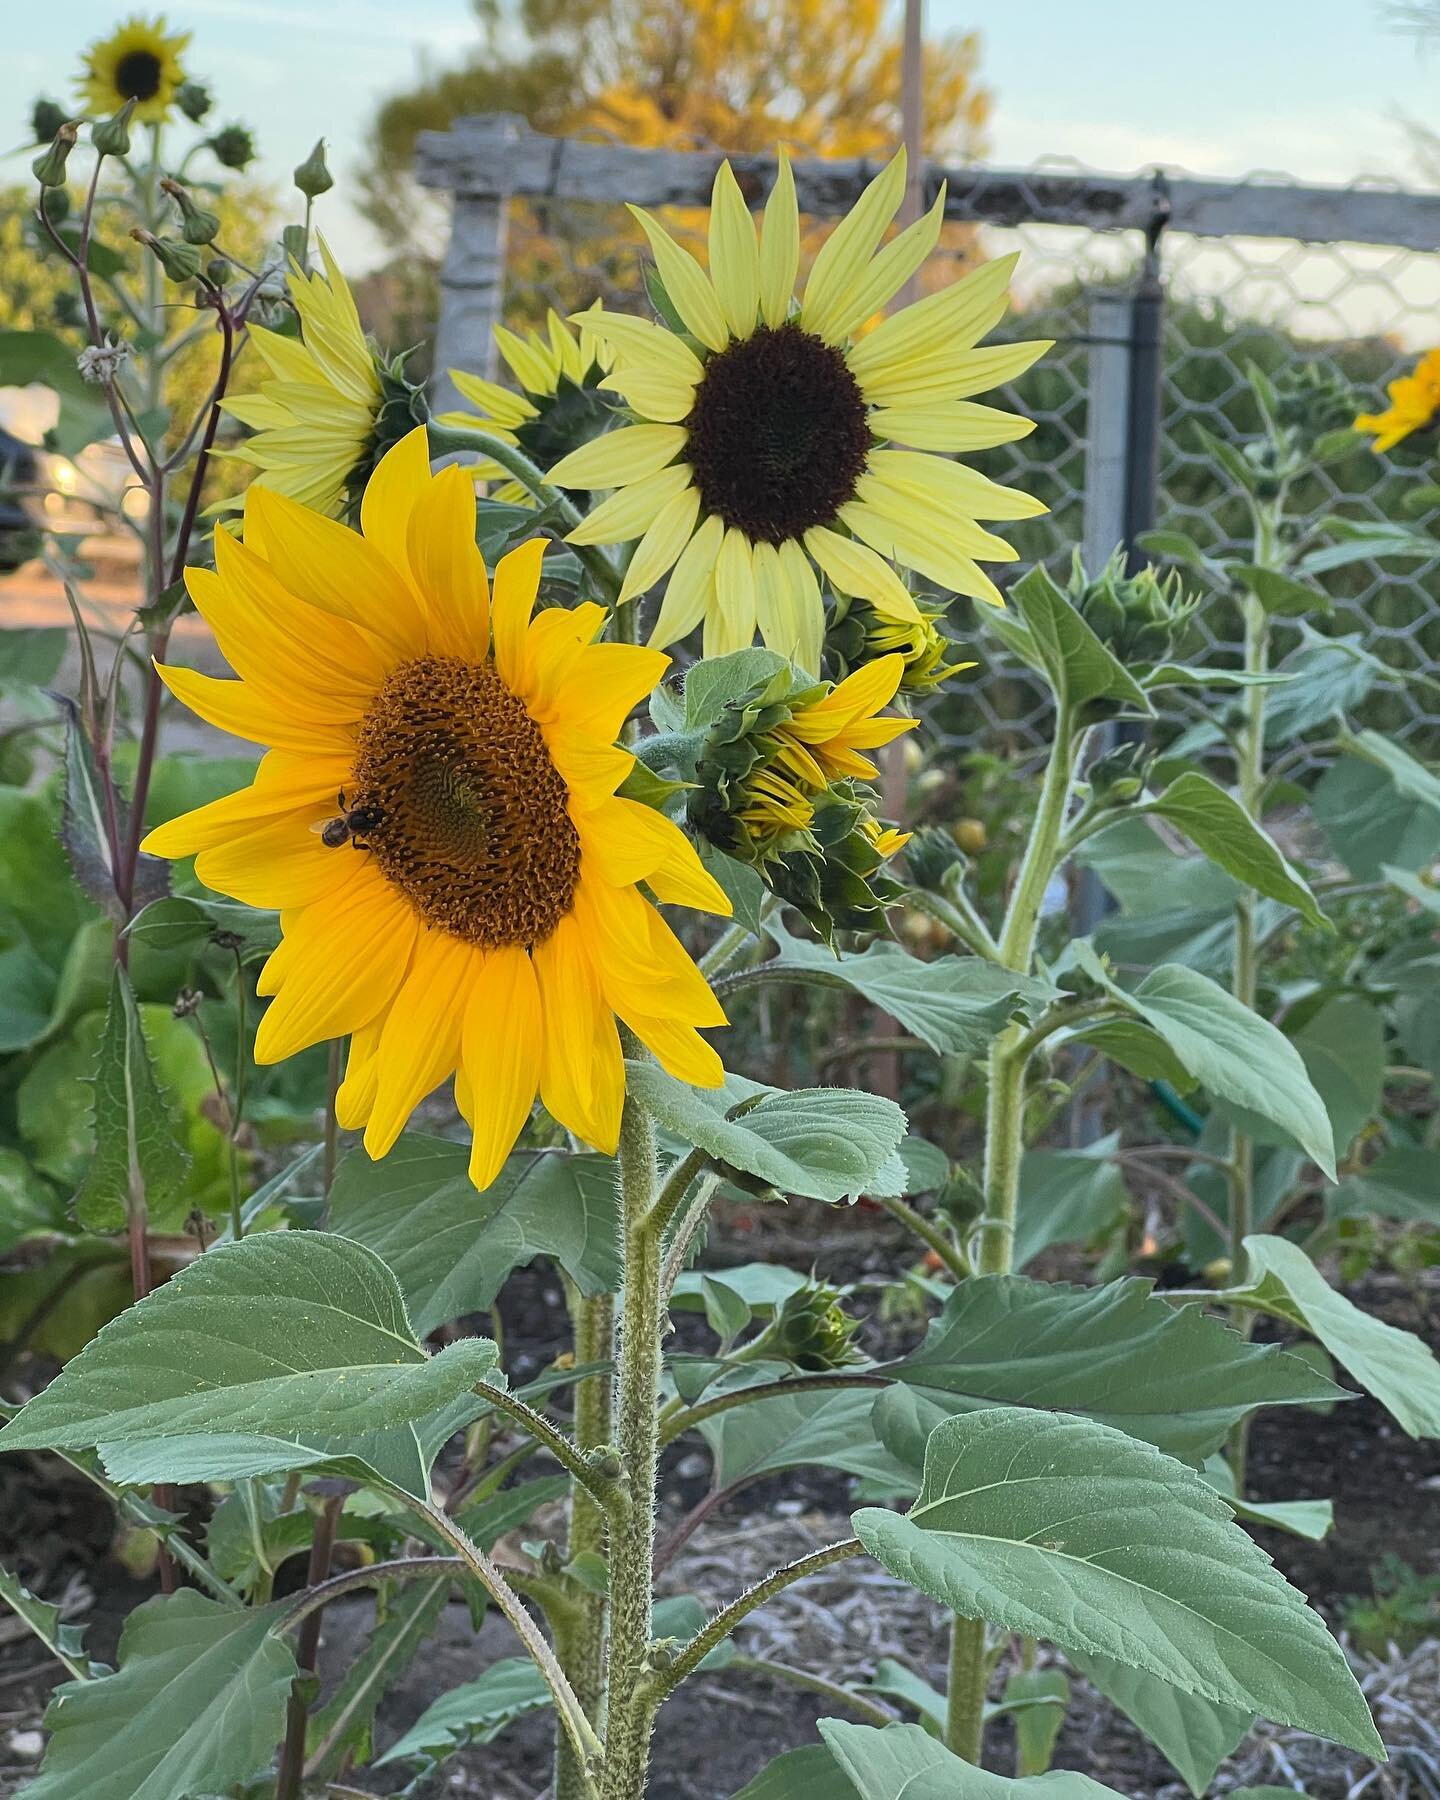 I always wanted a self-seeding garden. 
The sunflowers in the first pic were planted only around six weeks ago. All the kids in my family got the seeds from the dead flower heads and immersed them in the soil with so much love. 
They&rsquo;re thrivin